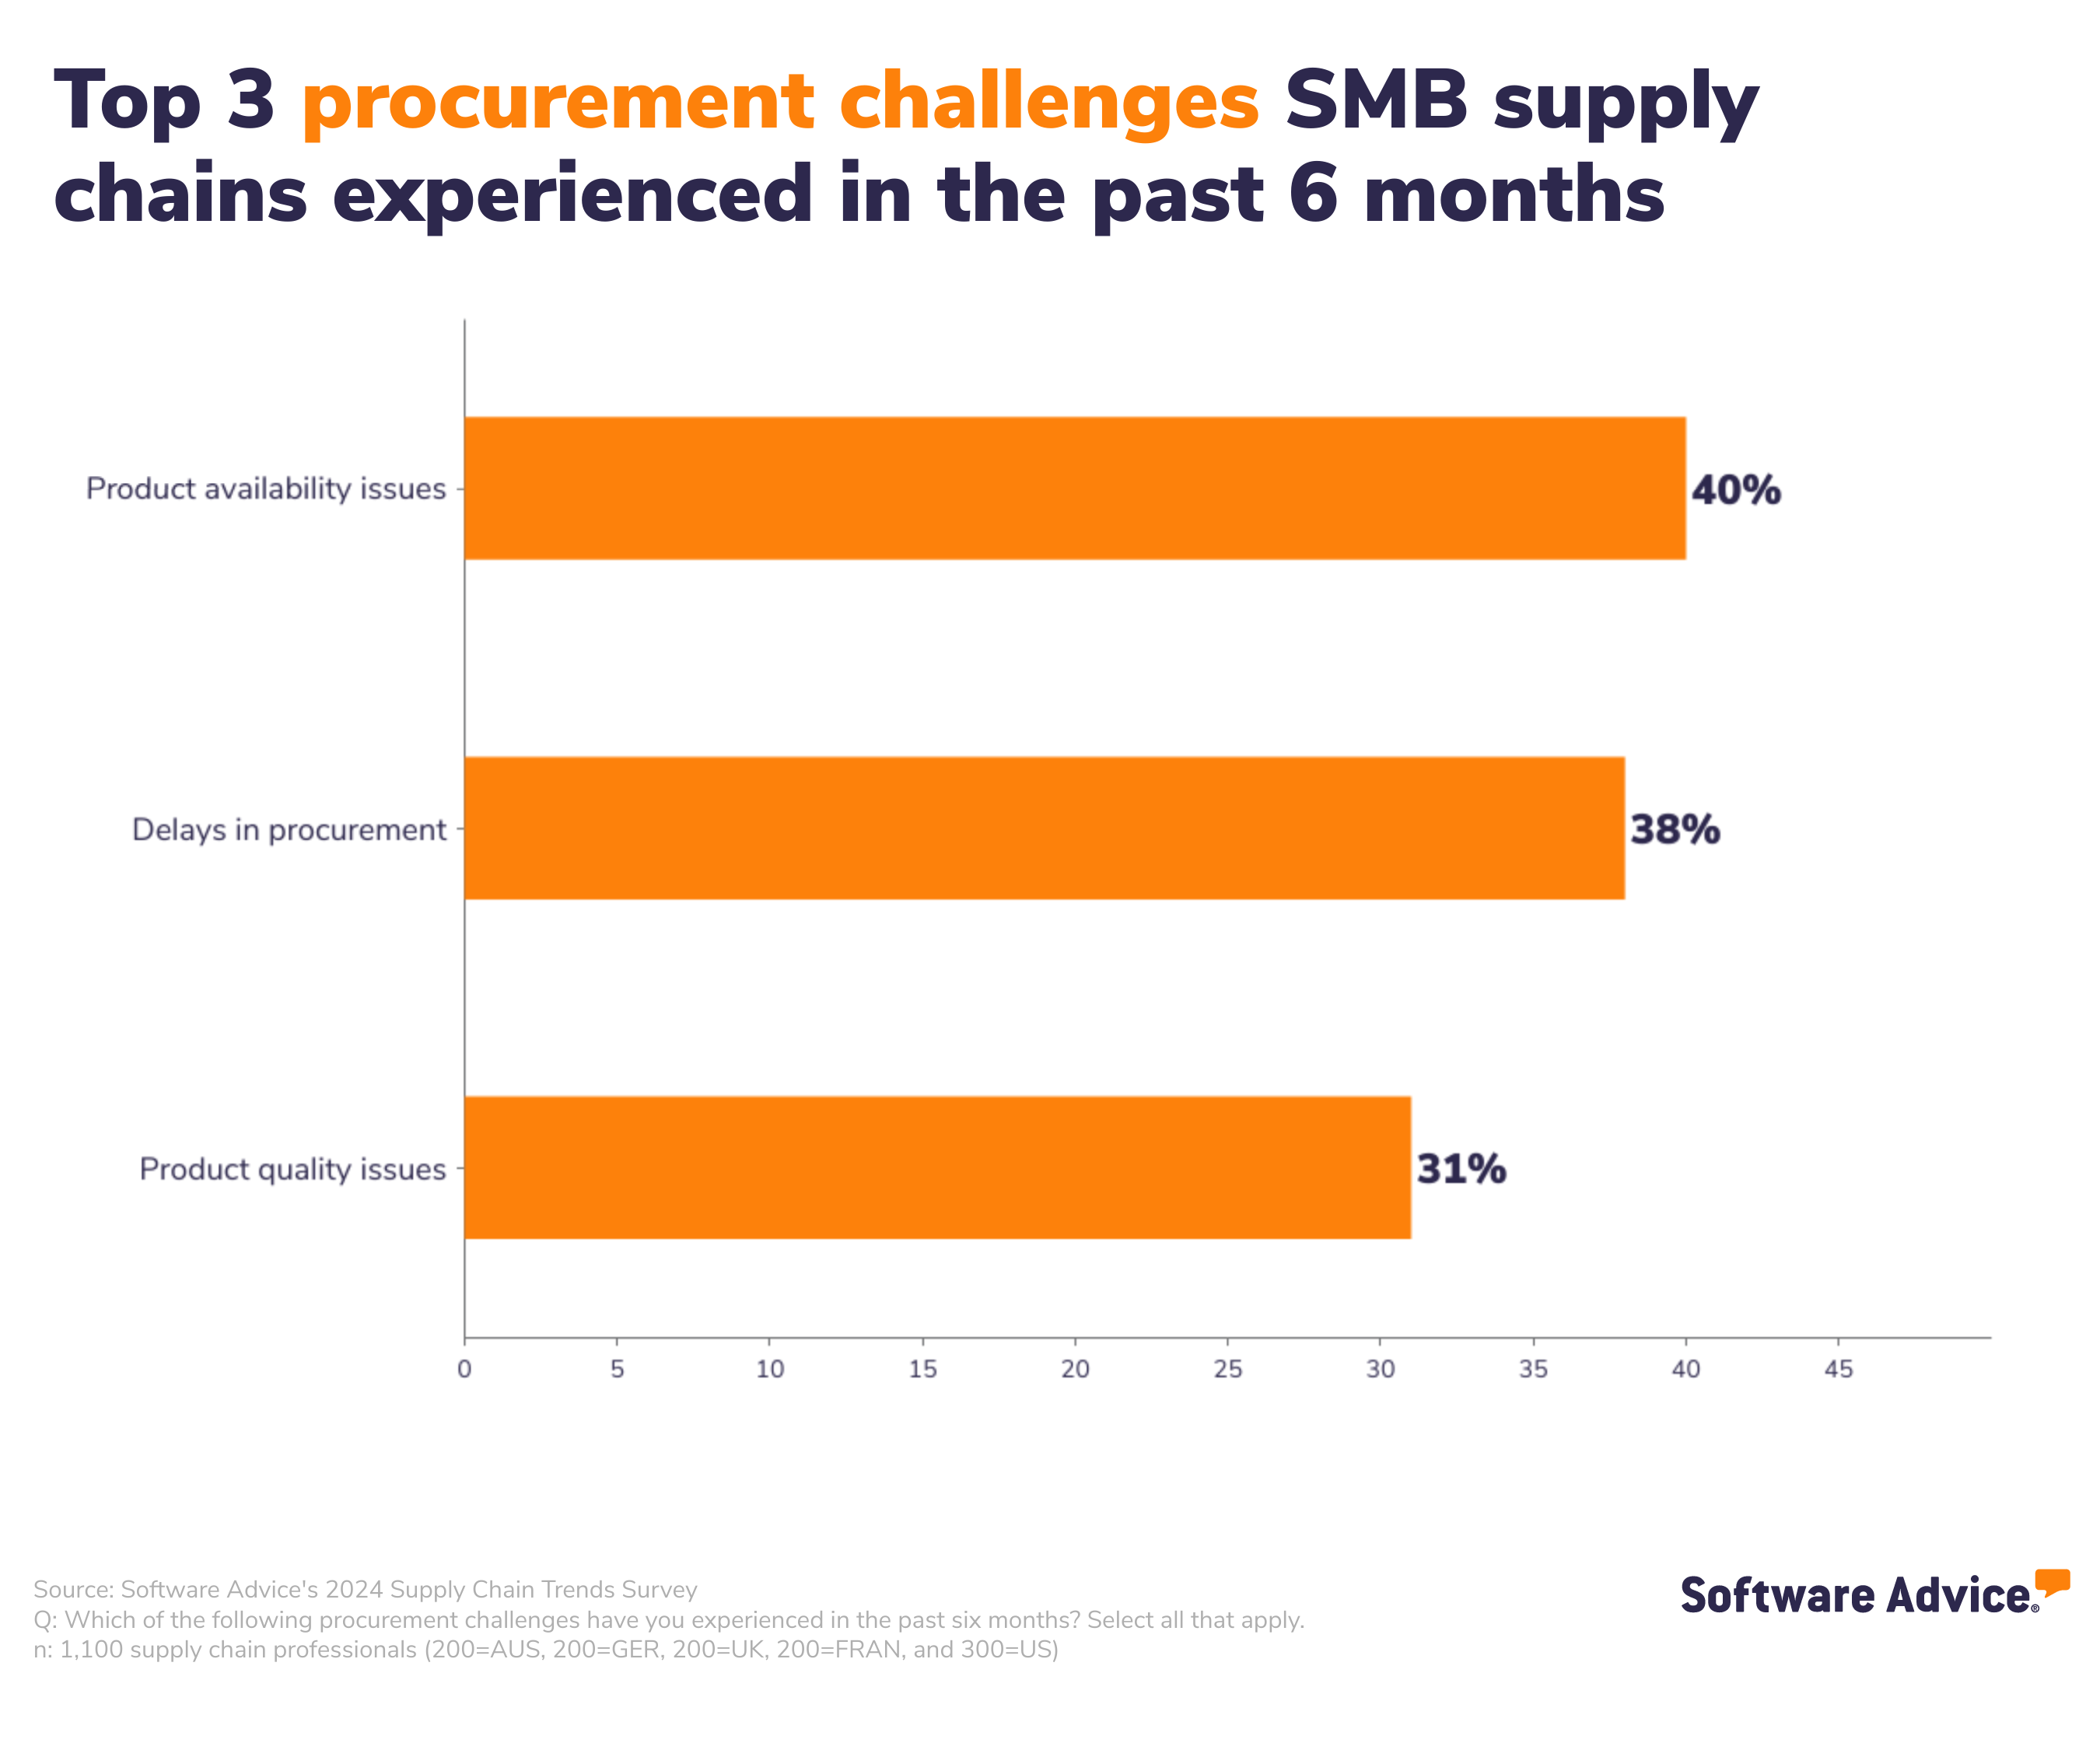 Top 3 technologies SMB supply chains plan to maintain or increase investment in for 2024